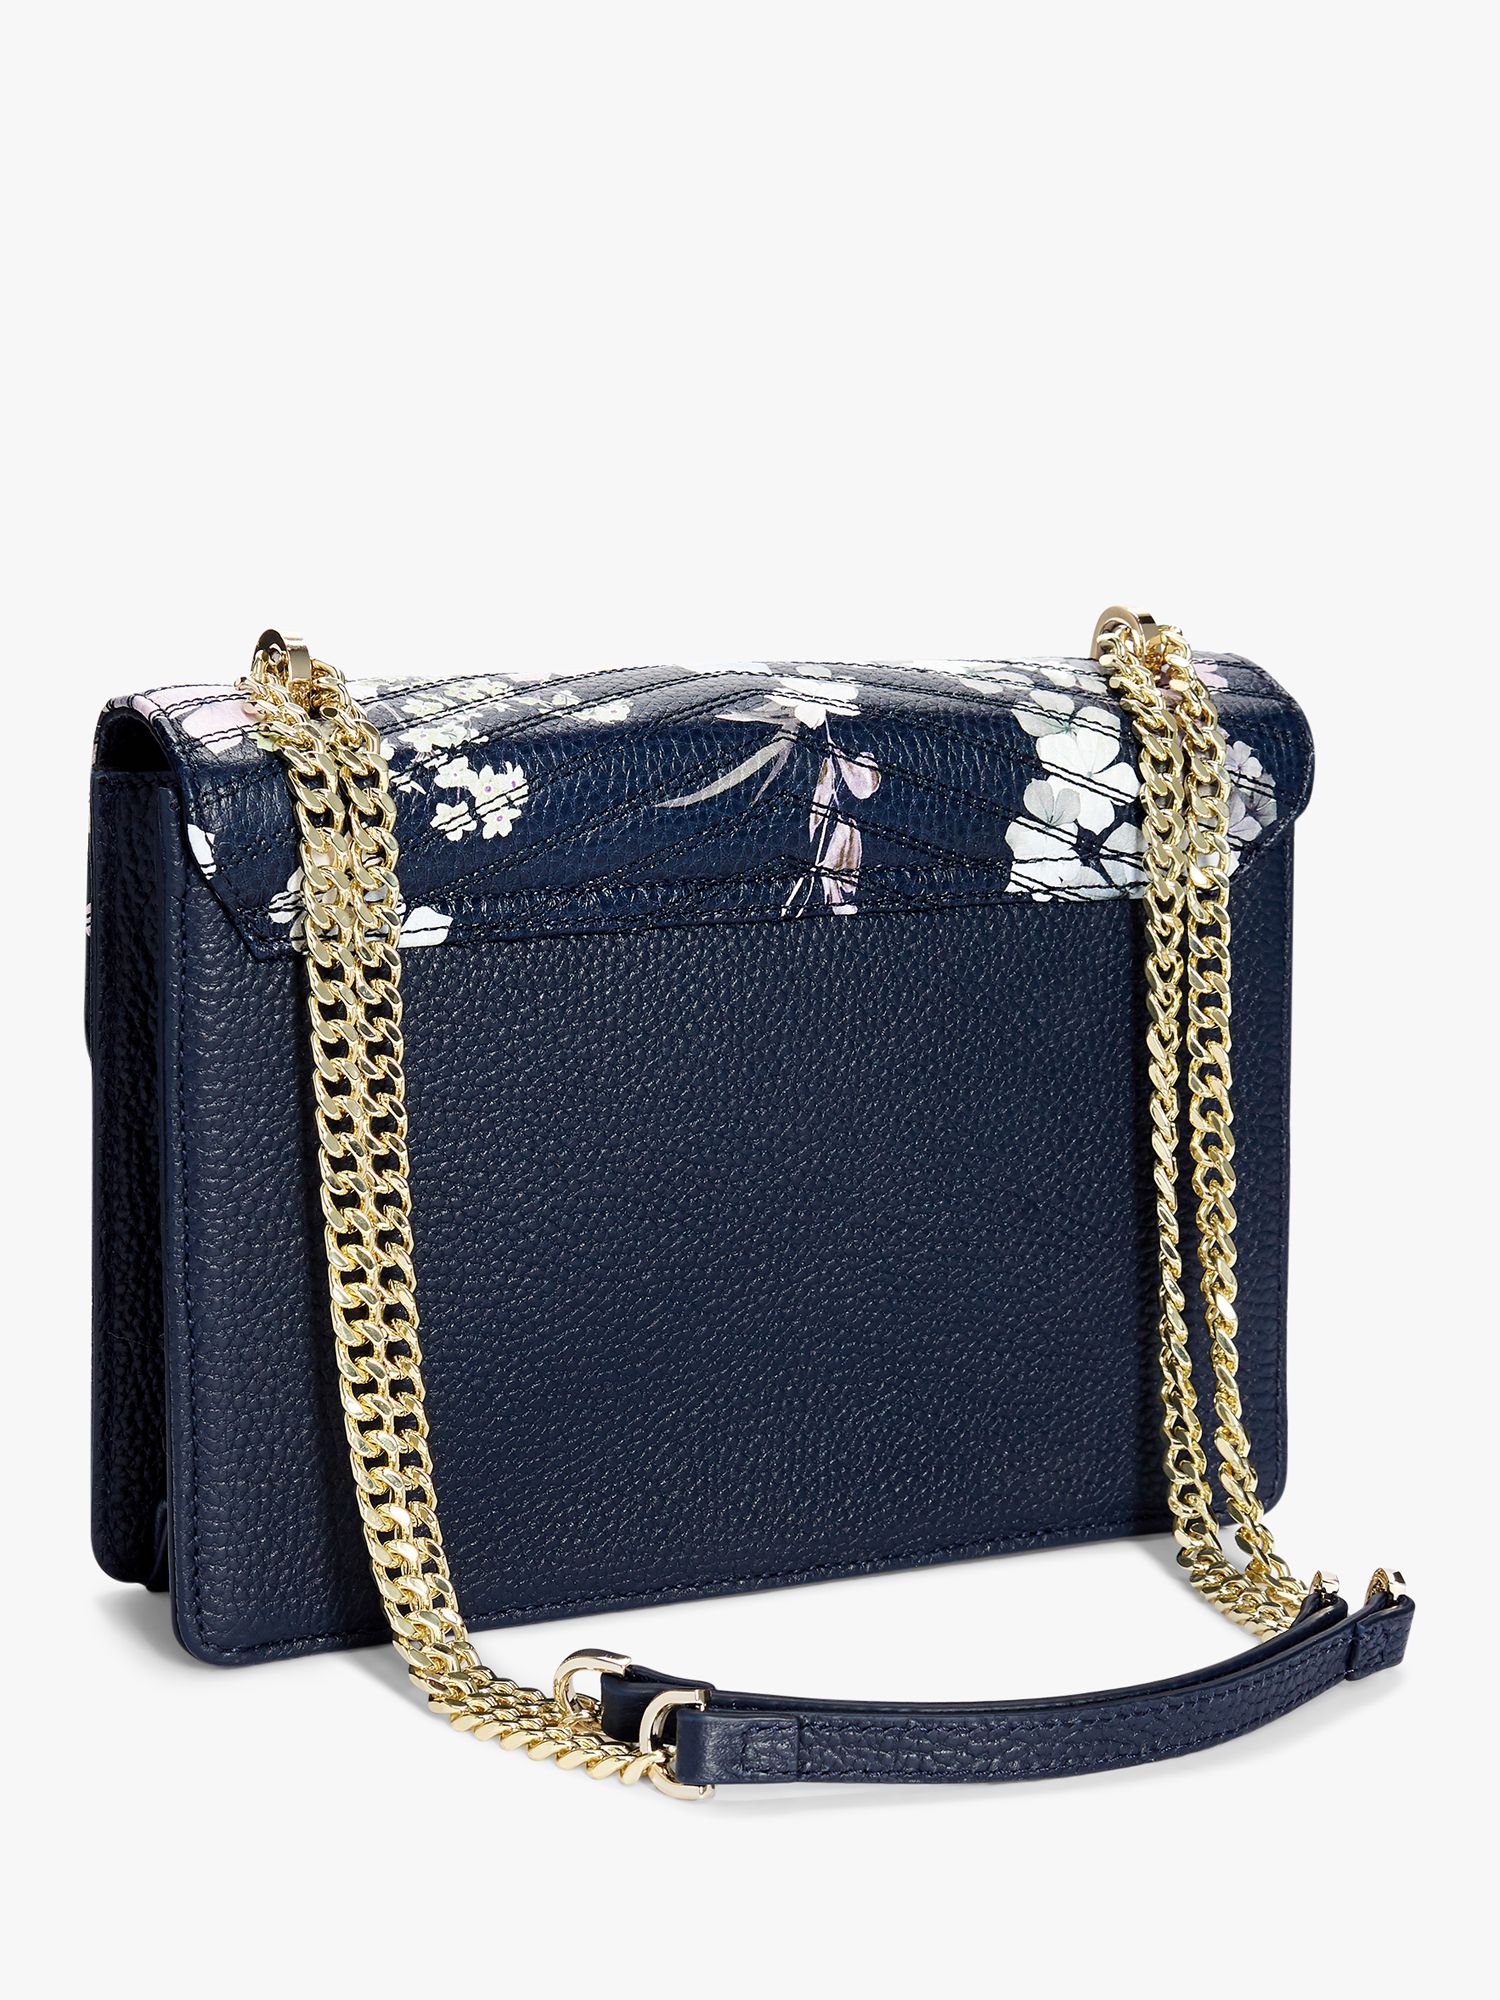 Ted Baker Peponia Leather Floral Crossbody Bag, Navy